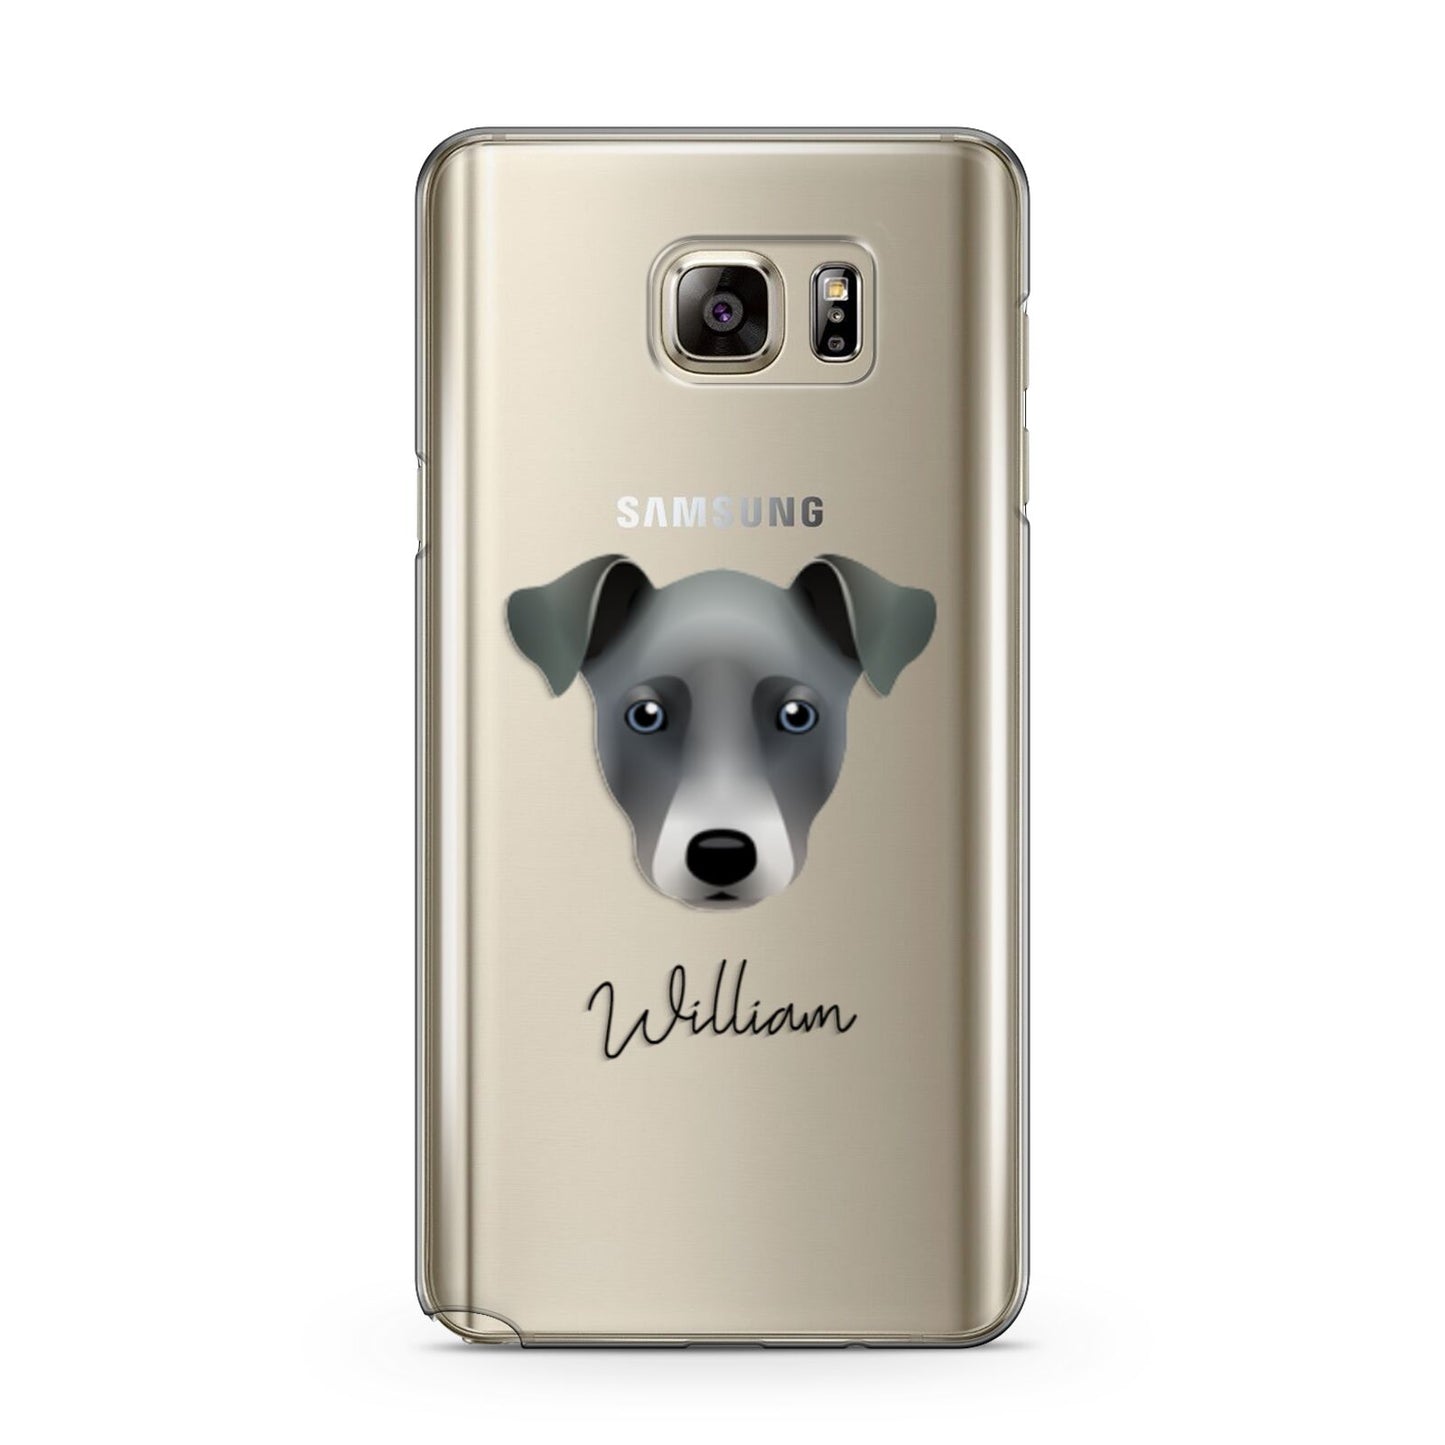 Chi Staffy Bull Personalised Samsung Galaxy Note 5 Case